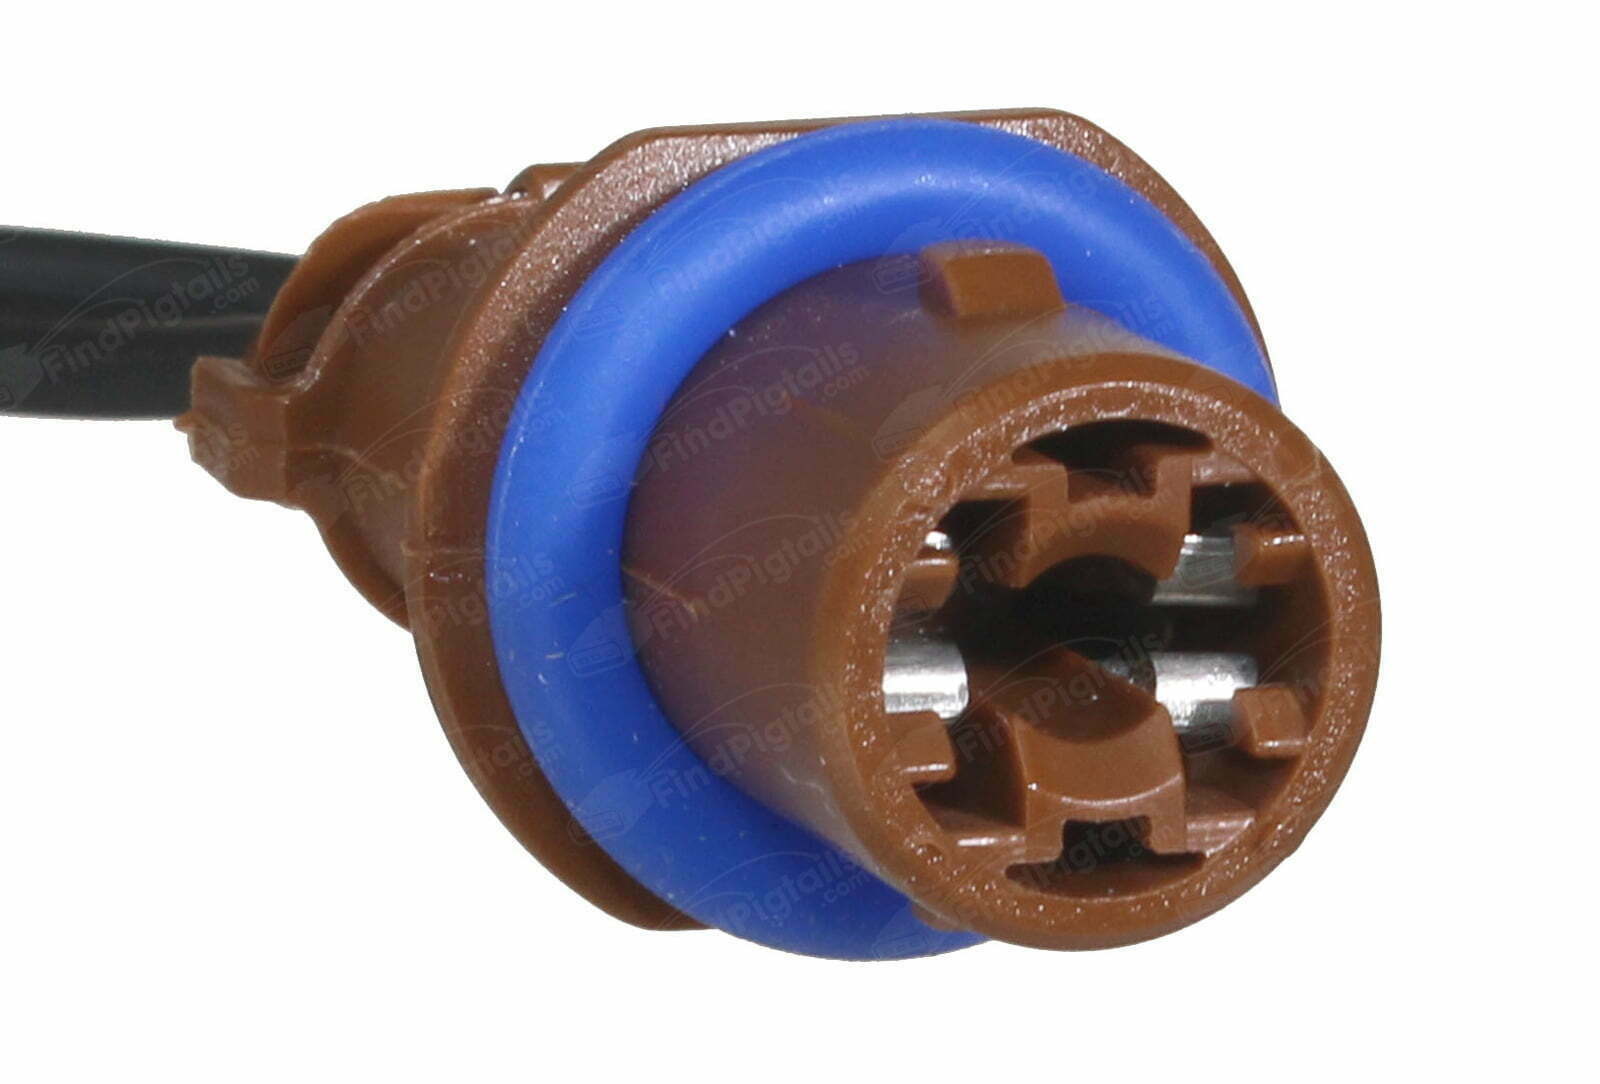 A33A2 is a 2-pin automotive connector which serves at least 23 functions for 1+ vehicles.